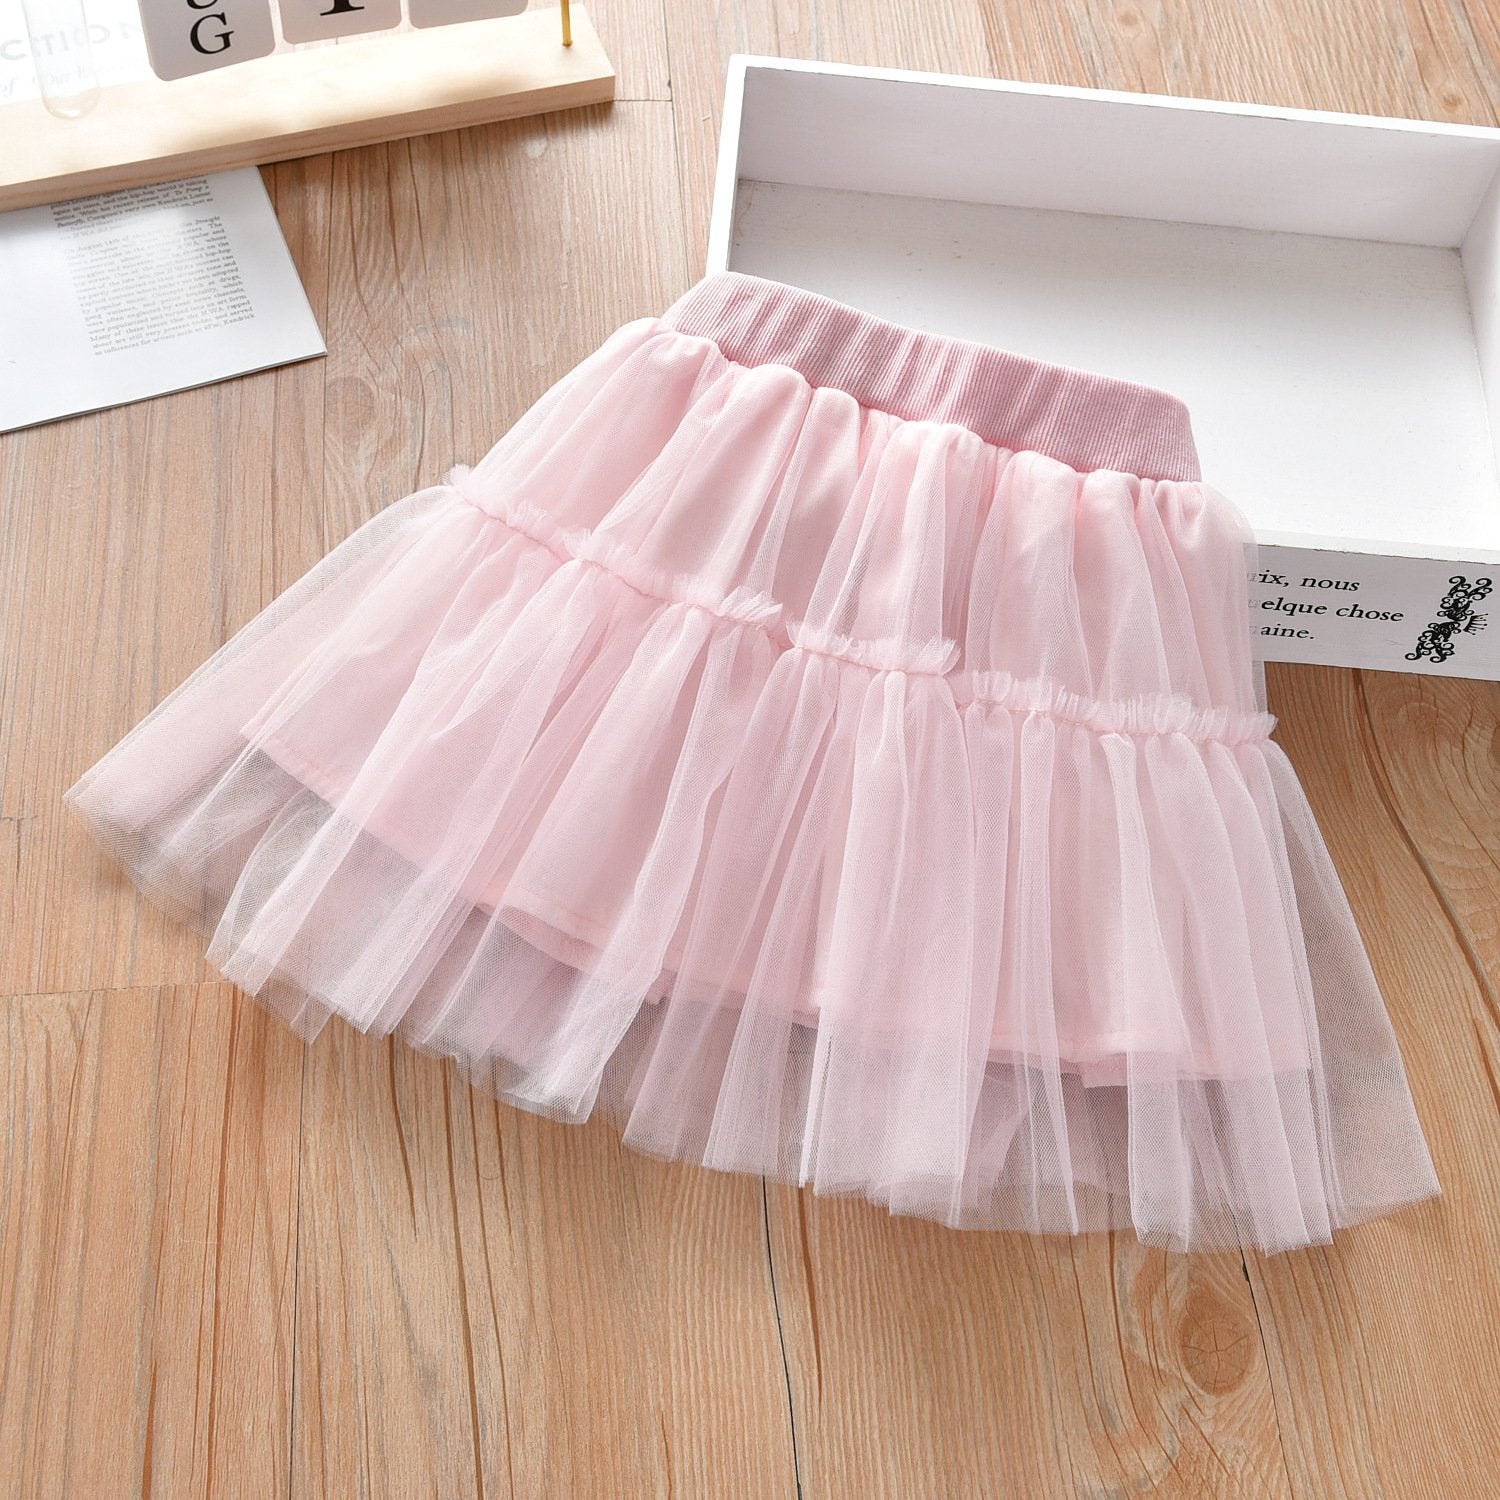 Girls Solid Color Mesh Skirt trendy kids wholesale clothing